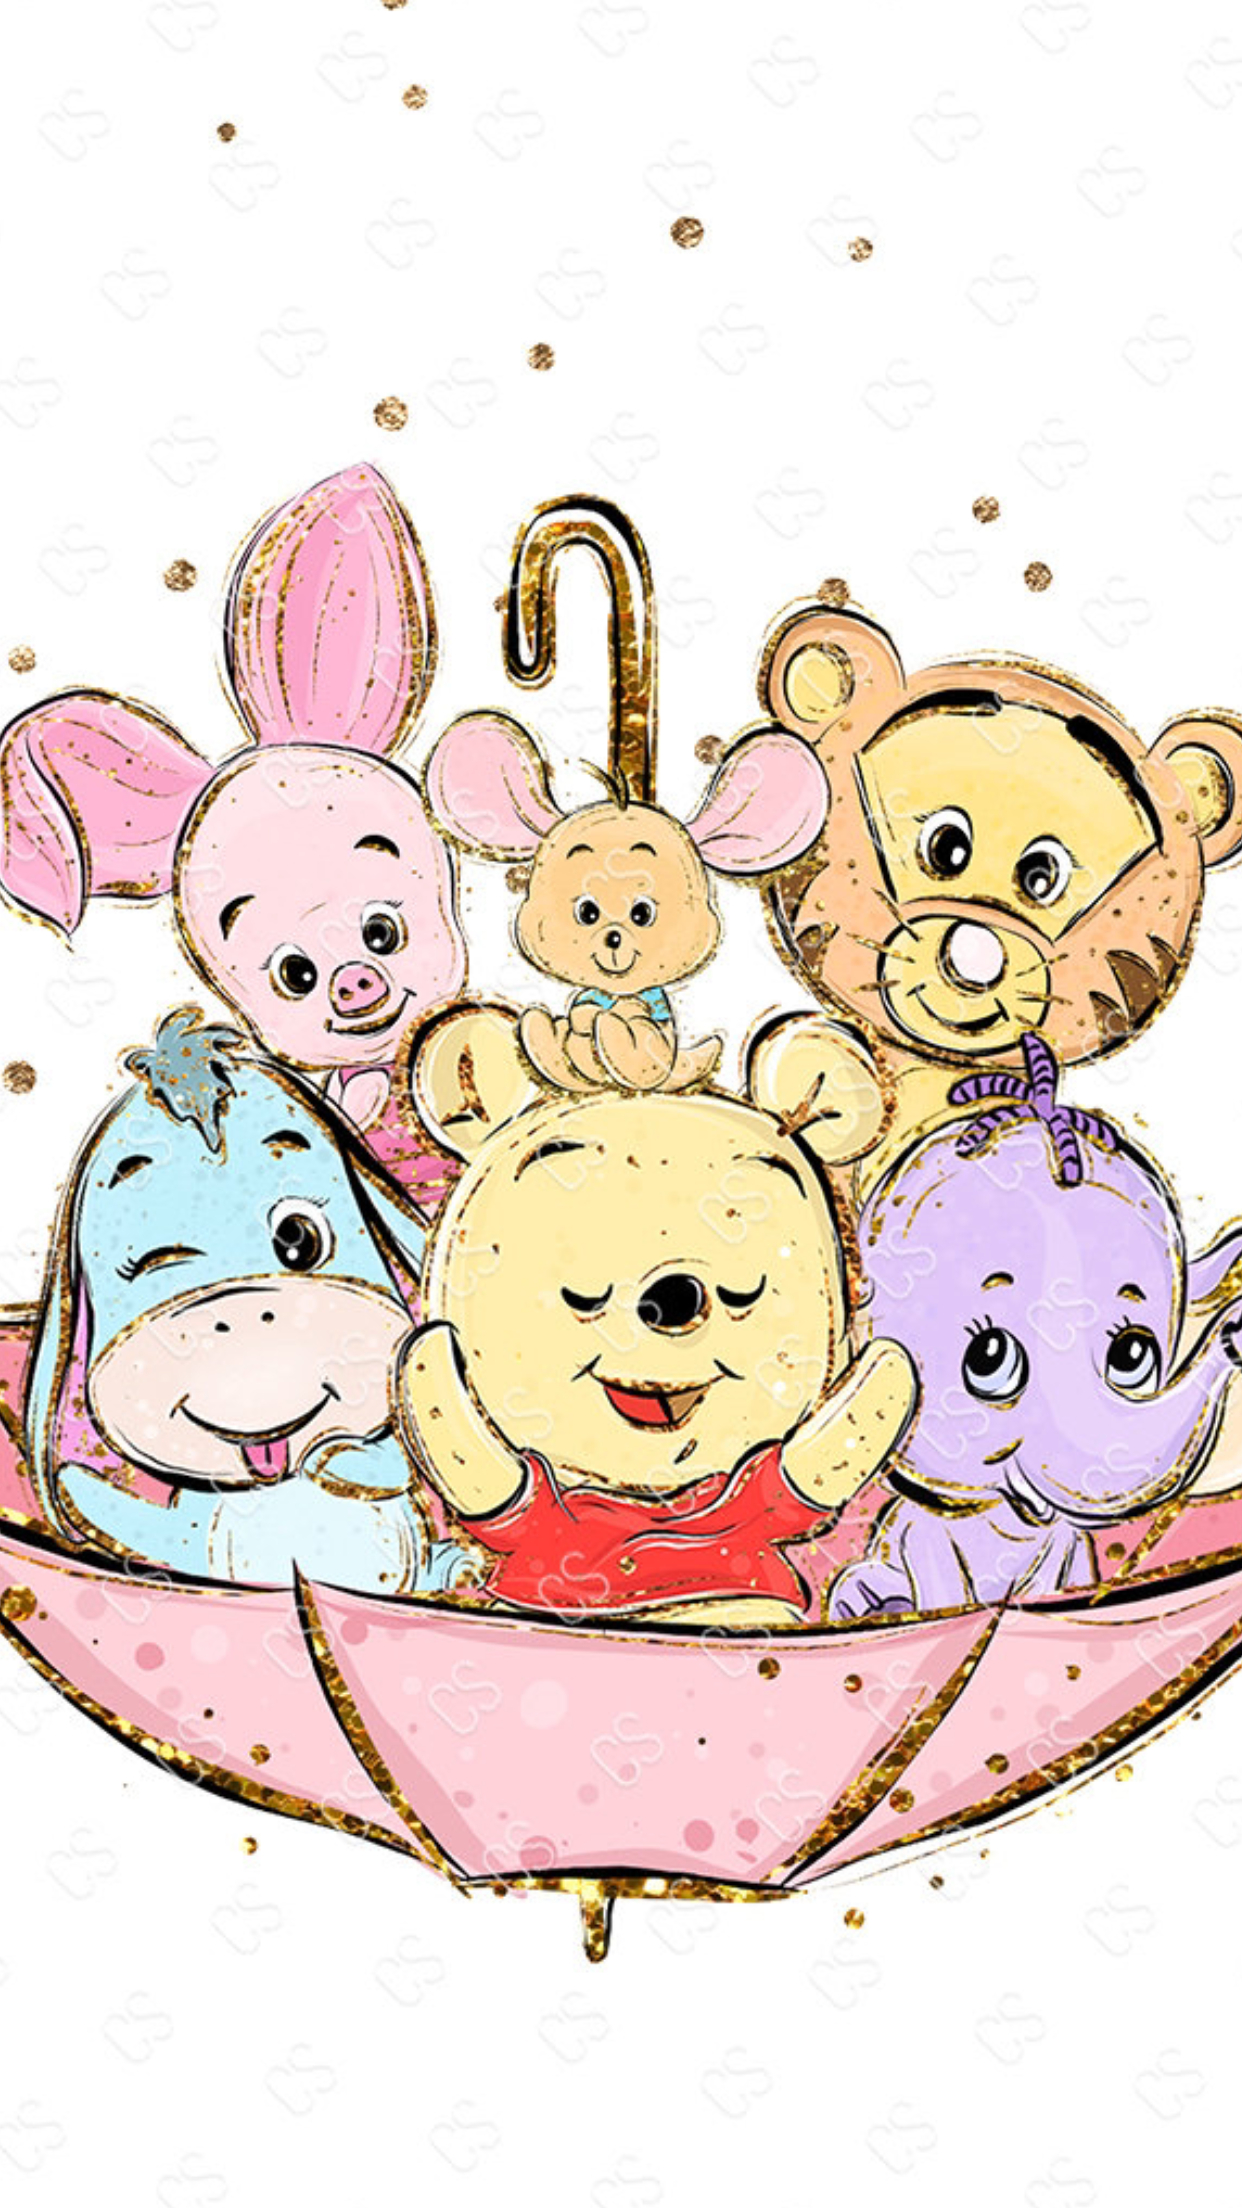 1242x2208 Pin by Dany on Wallpapers iPhone | Cute winnie the pooh, Cute disney wallpaper, Wallpaper iphone disney